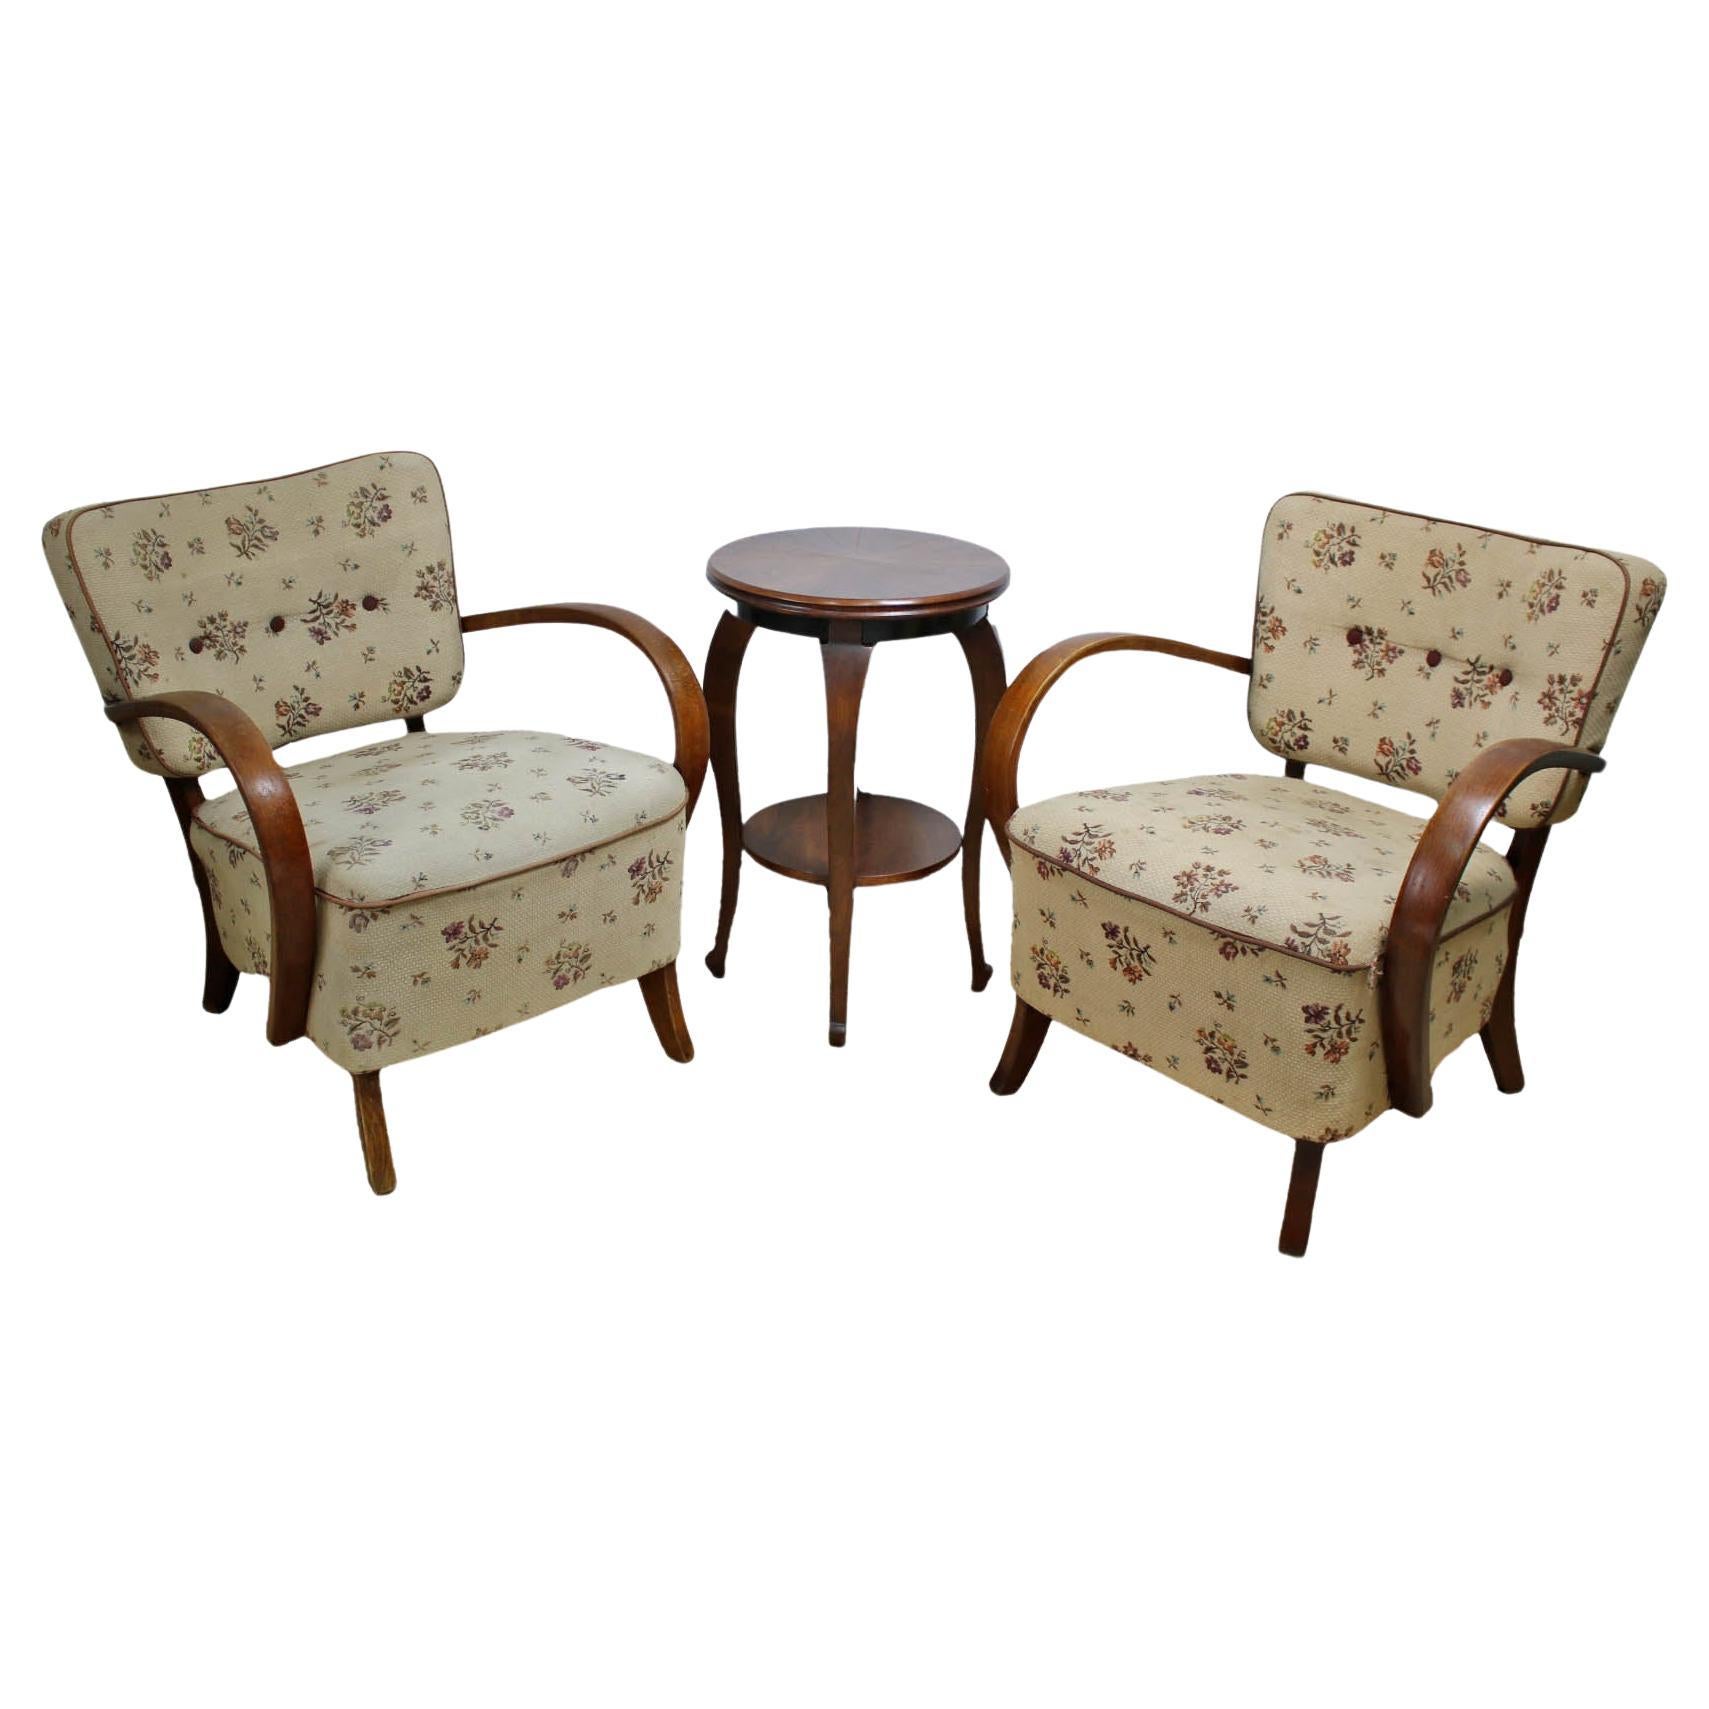 Art Deco Armchairs, H237 by Jindrich Halabala, Flower Patterned Upholstery